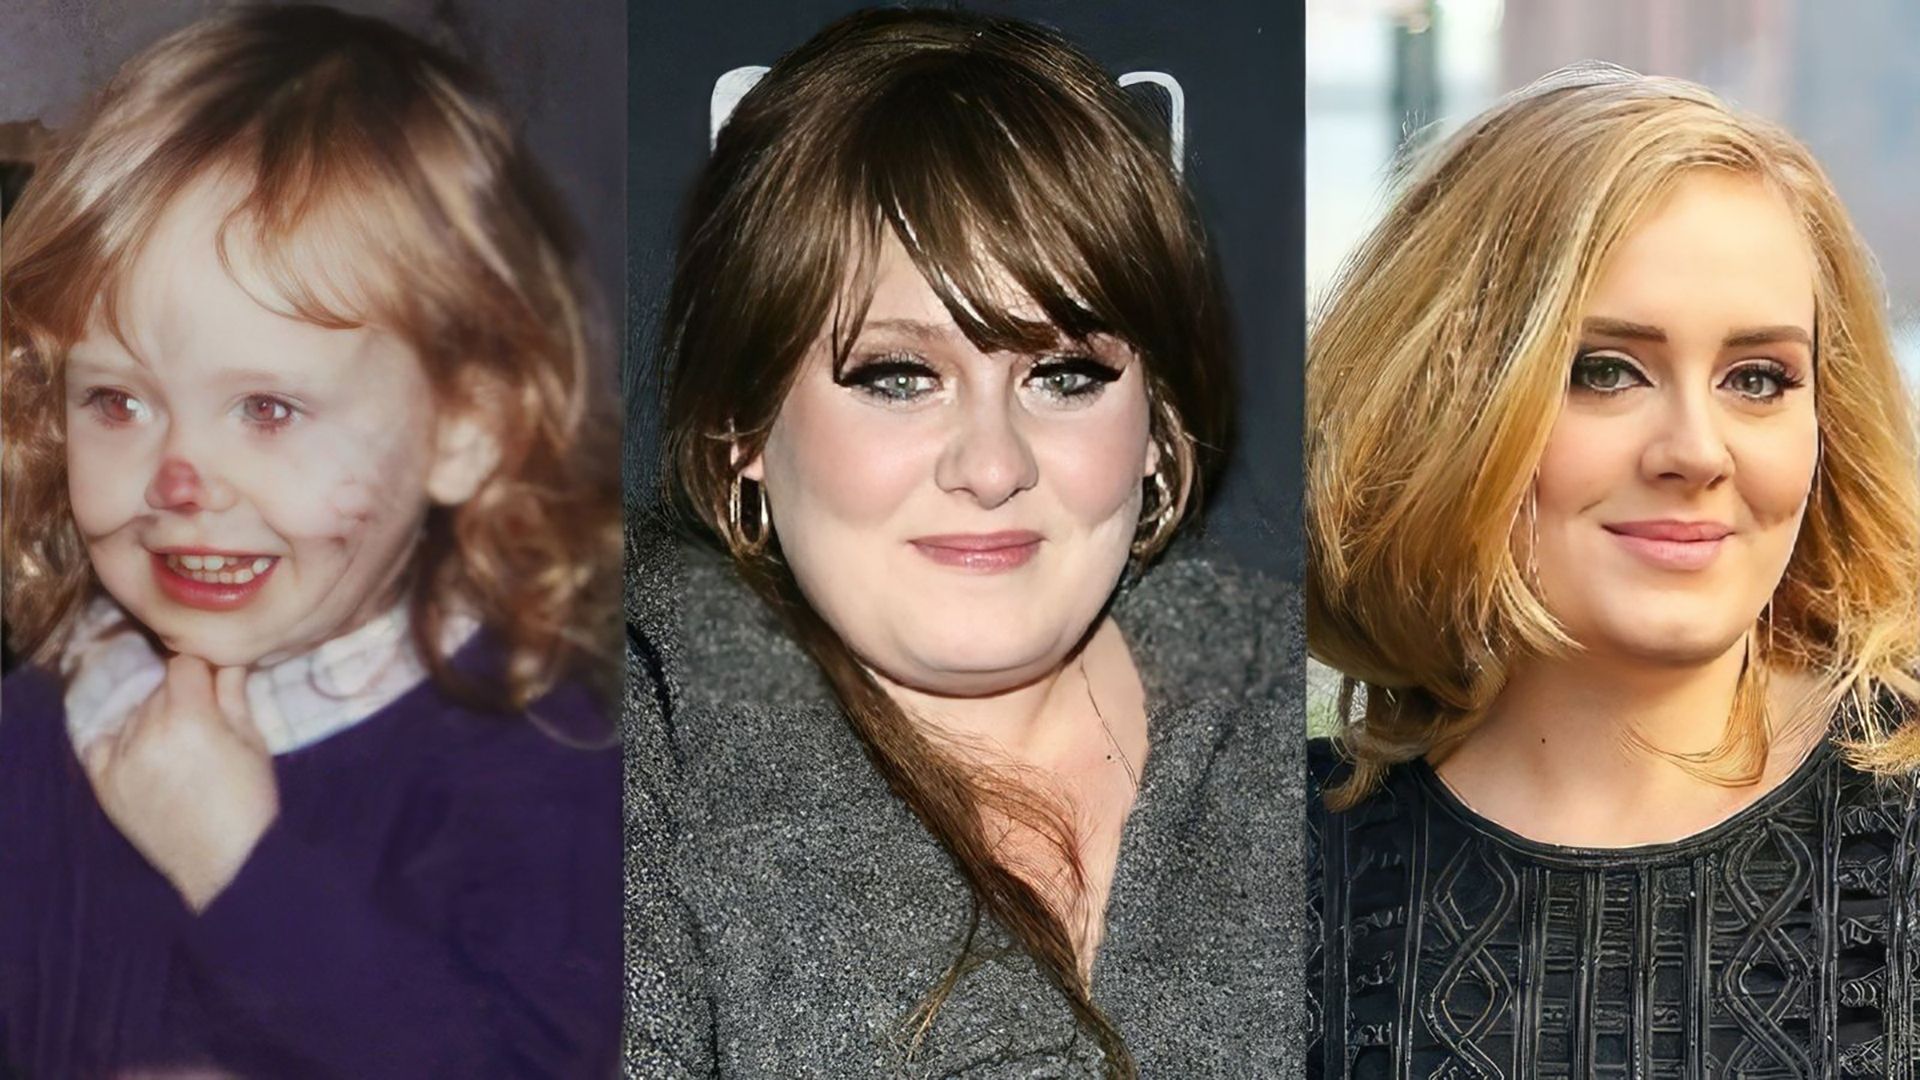 Singer Adele in childhood, adolescence and now